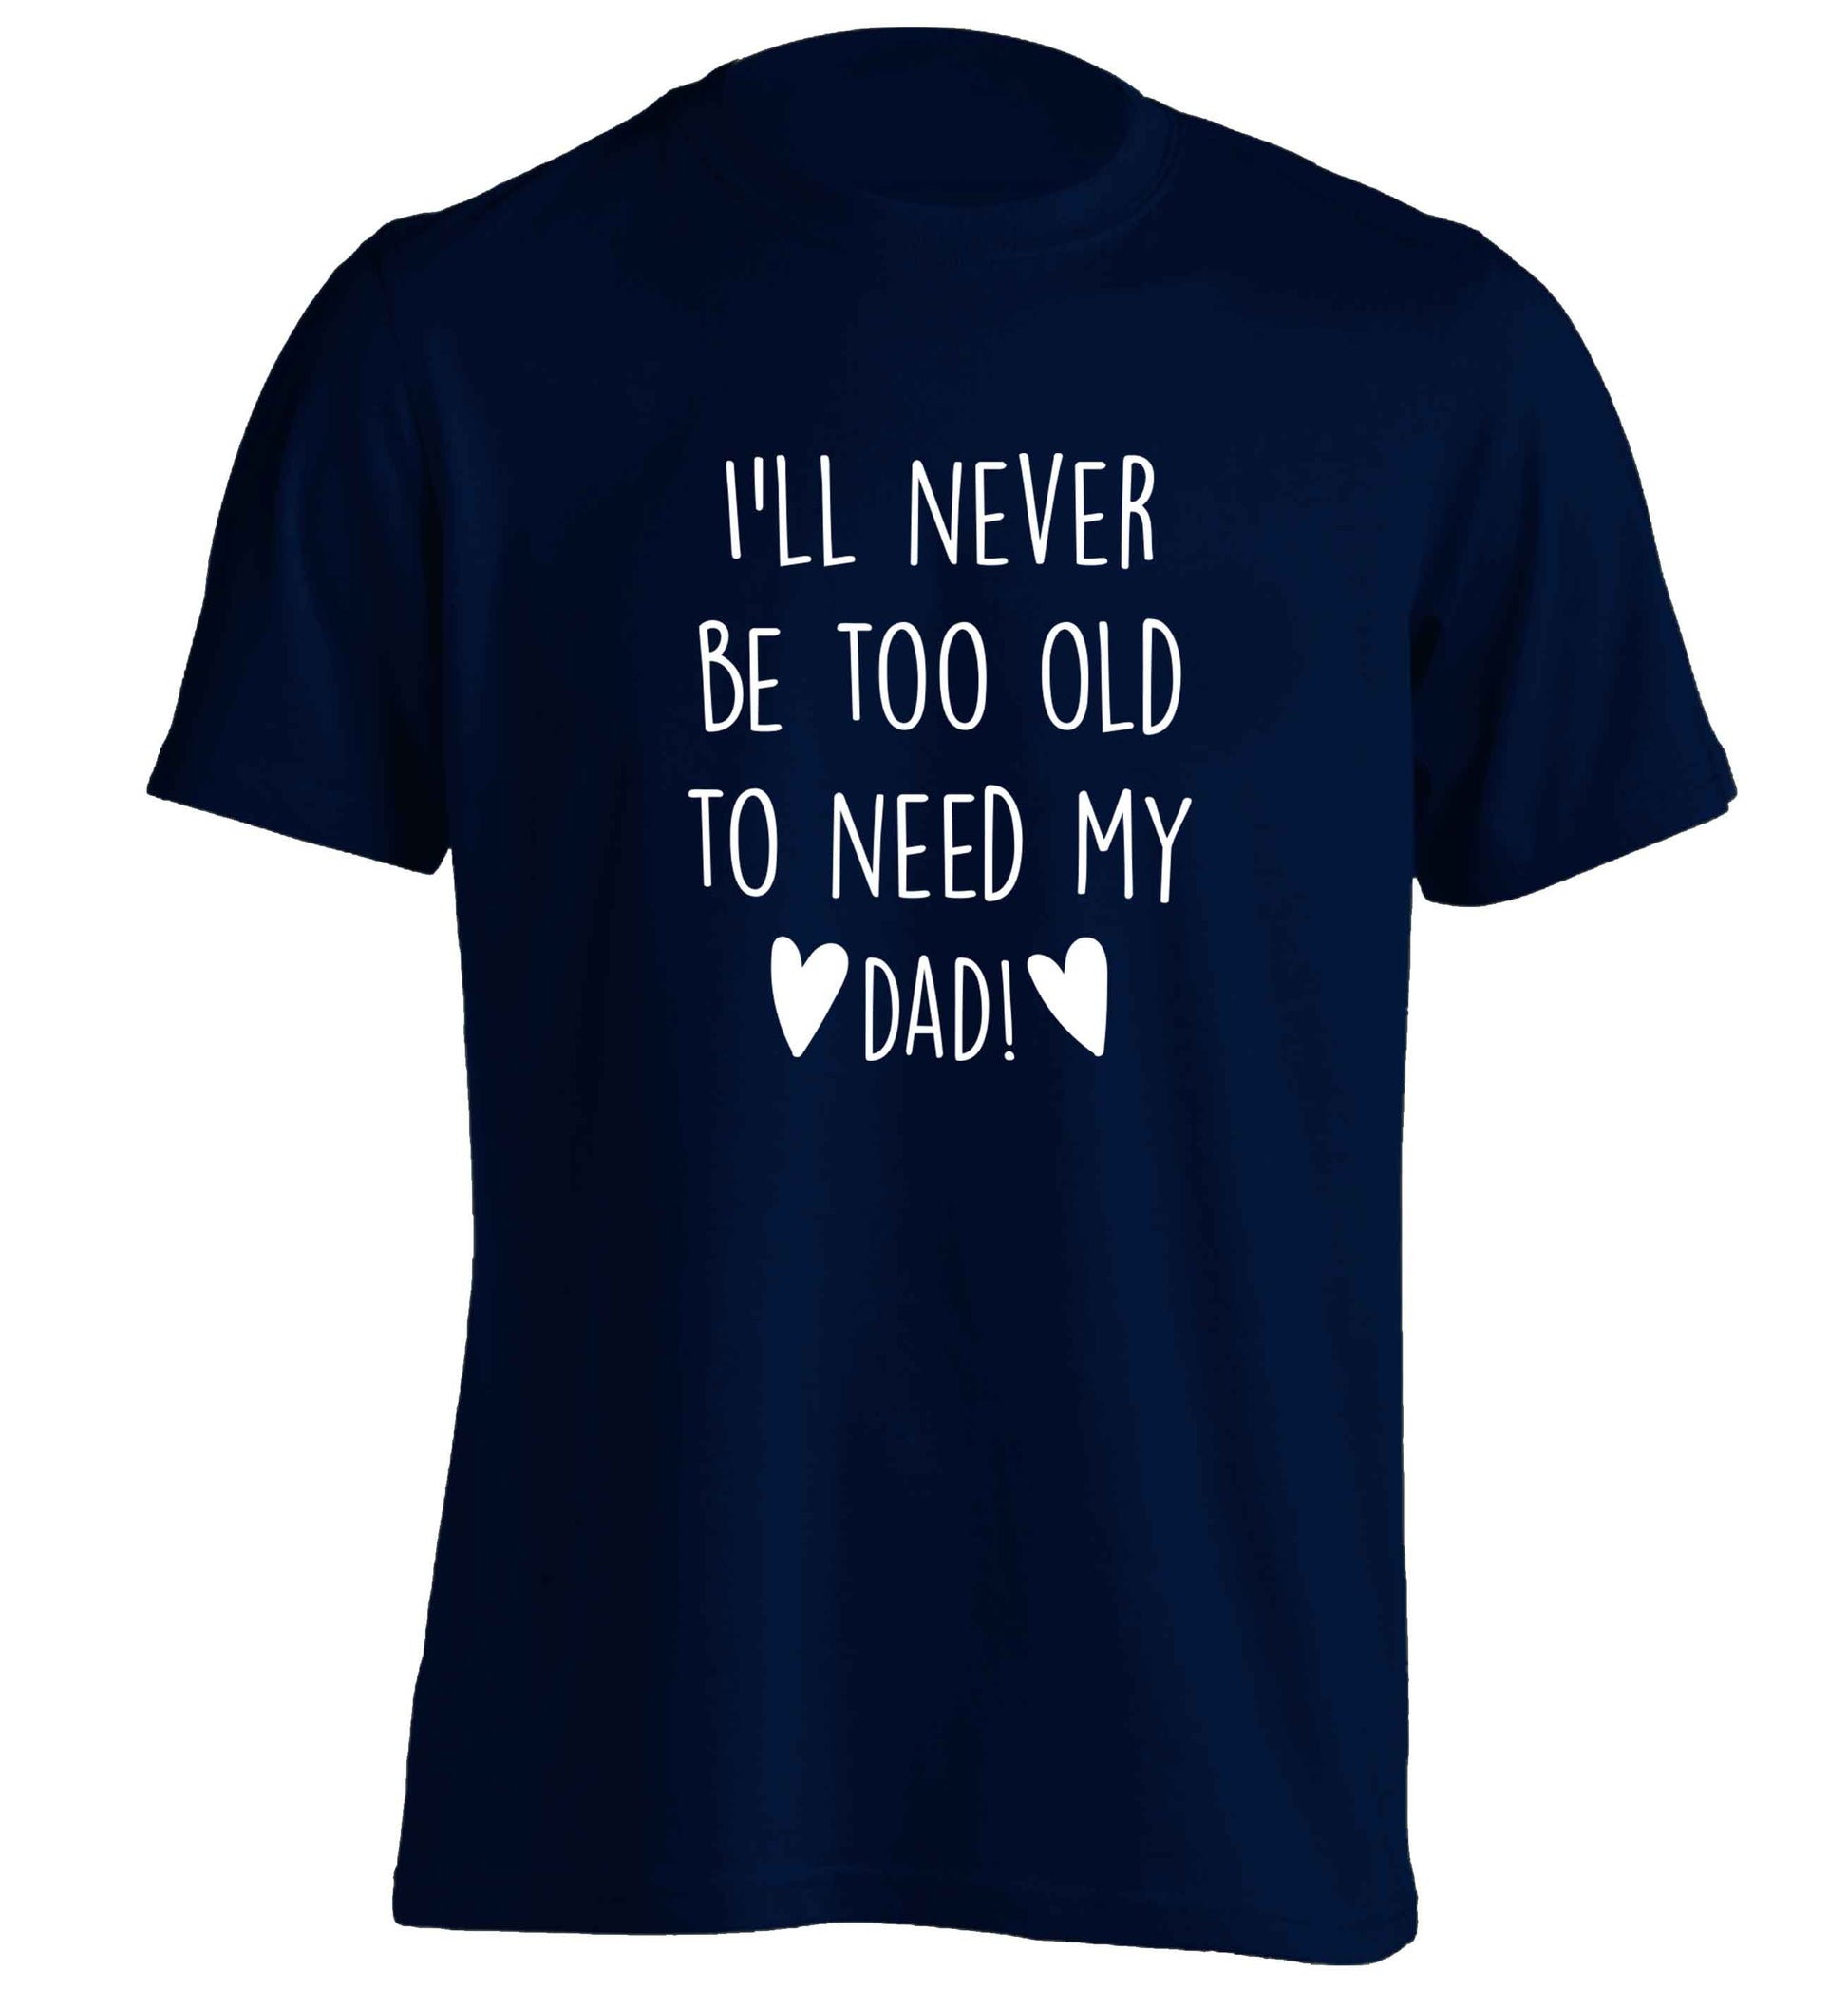 I'll never be too old to need my dad adults unisex navy Tshirt 2XL